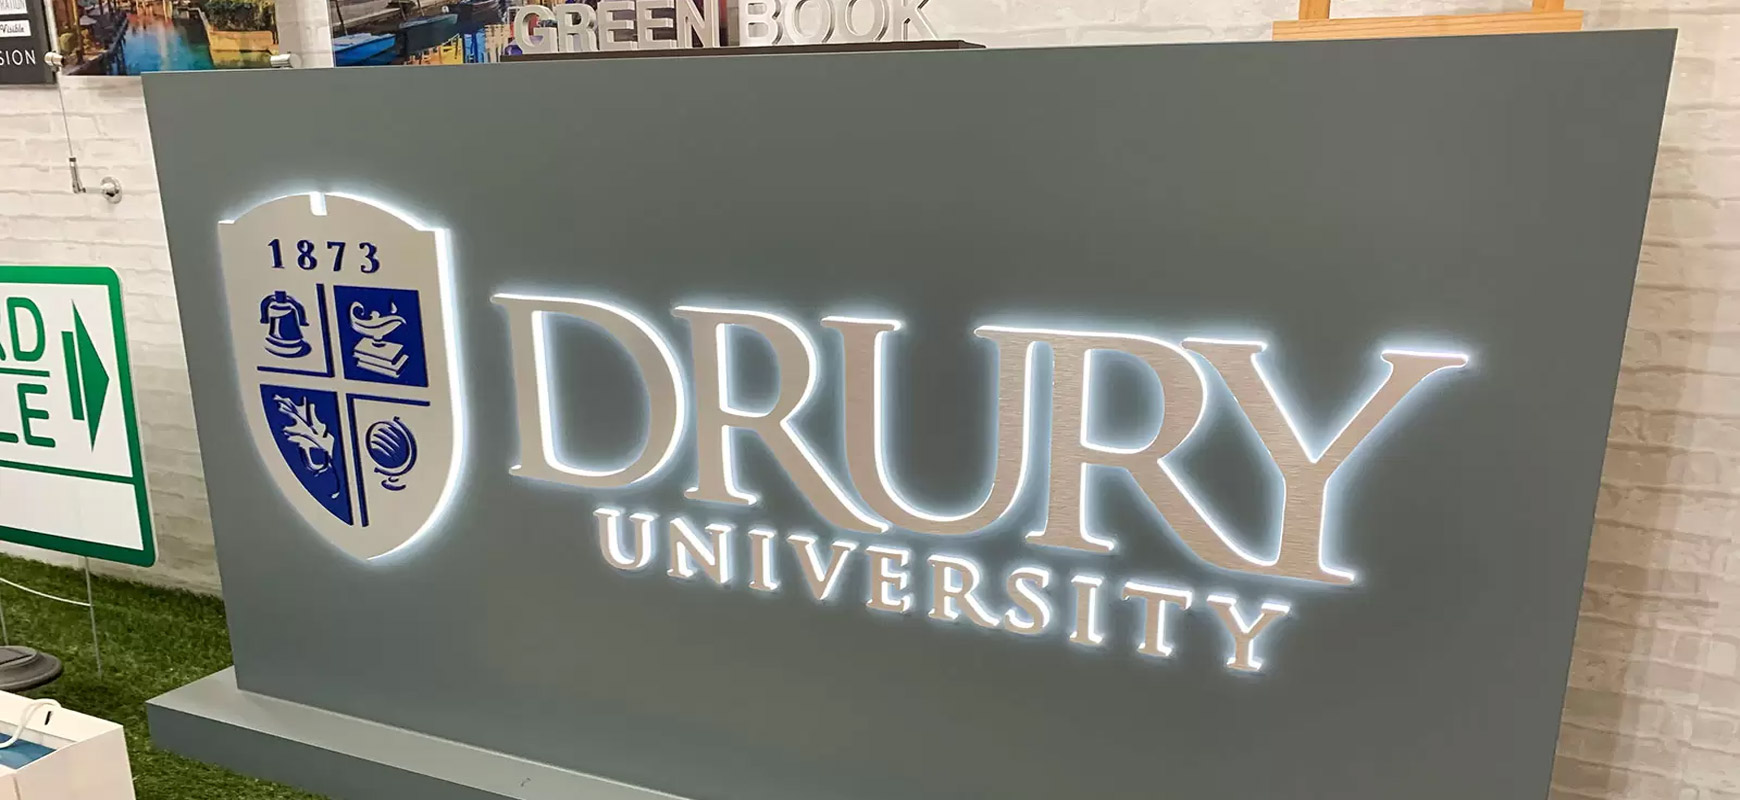 Drury University halo-lit signs in a free-standing style made of brushed aluminum and acrylic